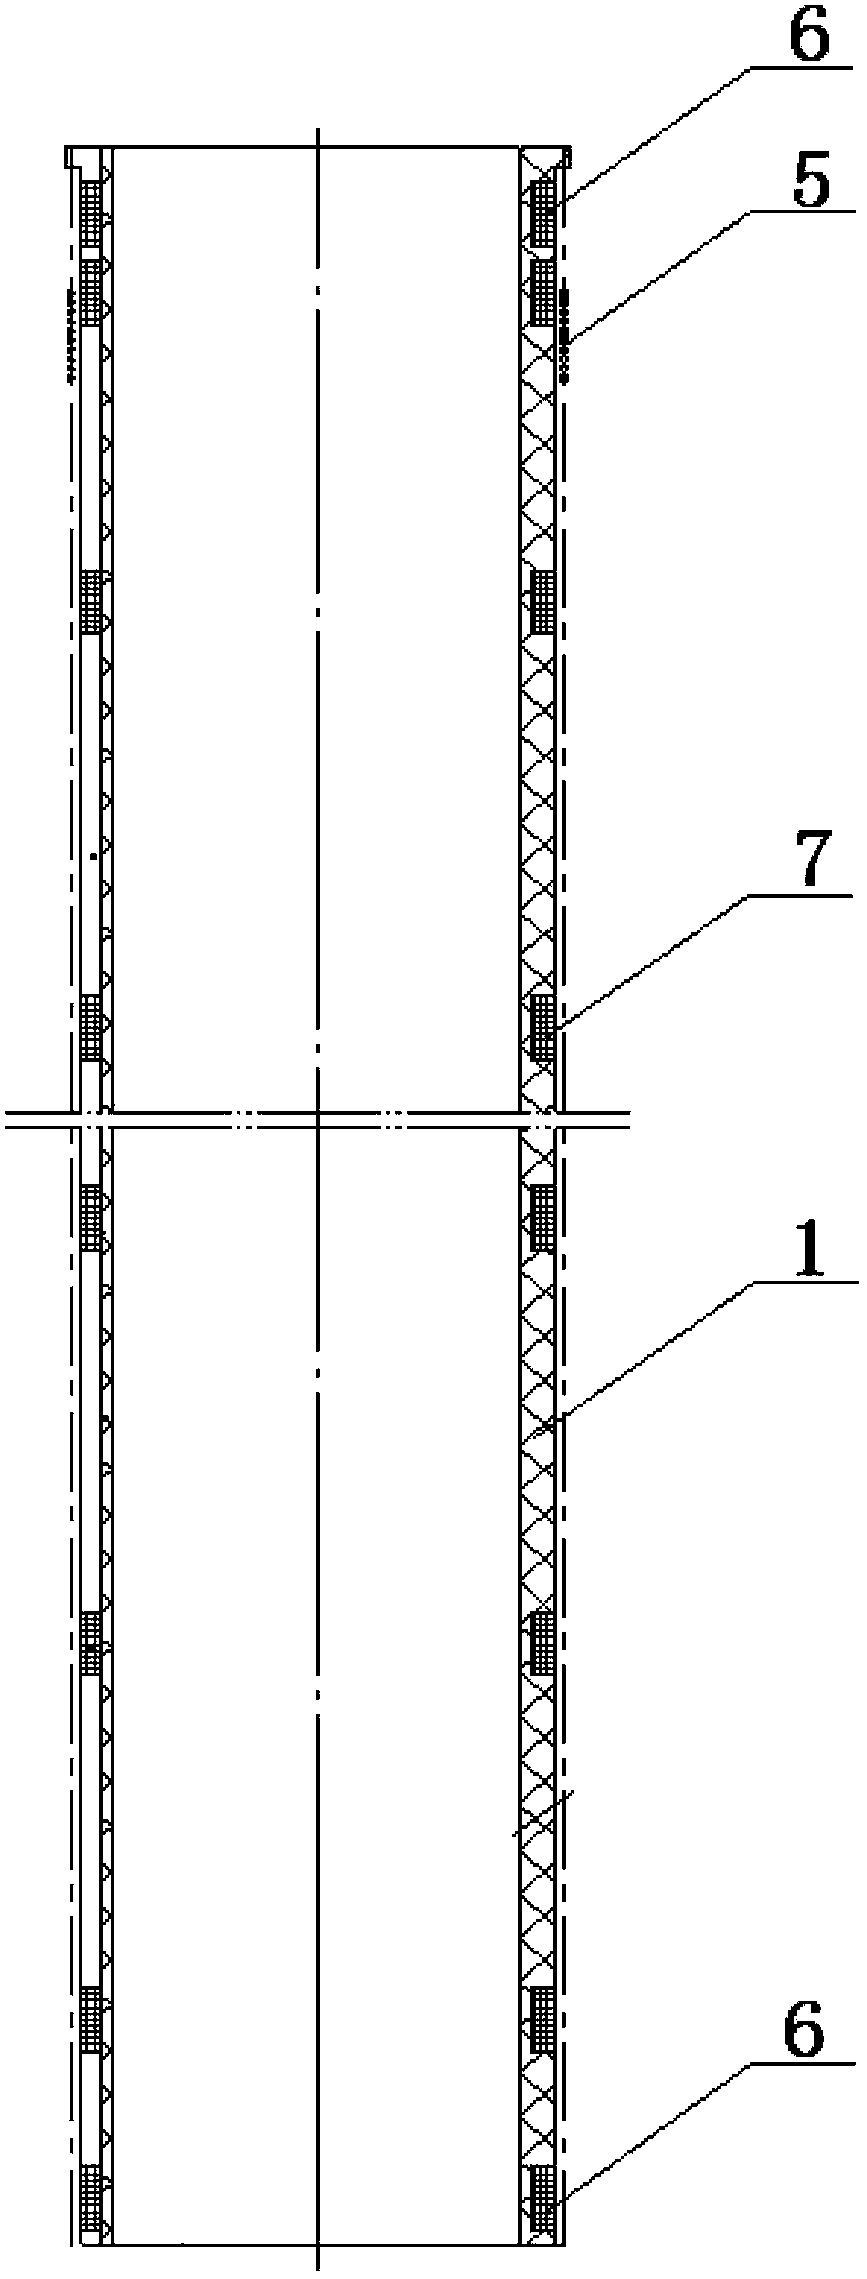 Differential transformer type control bar position detector